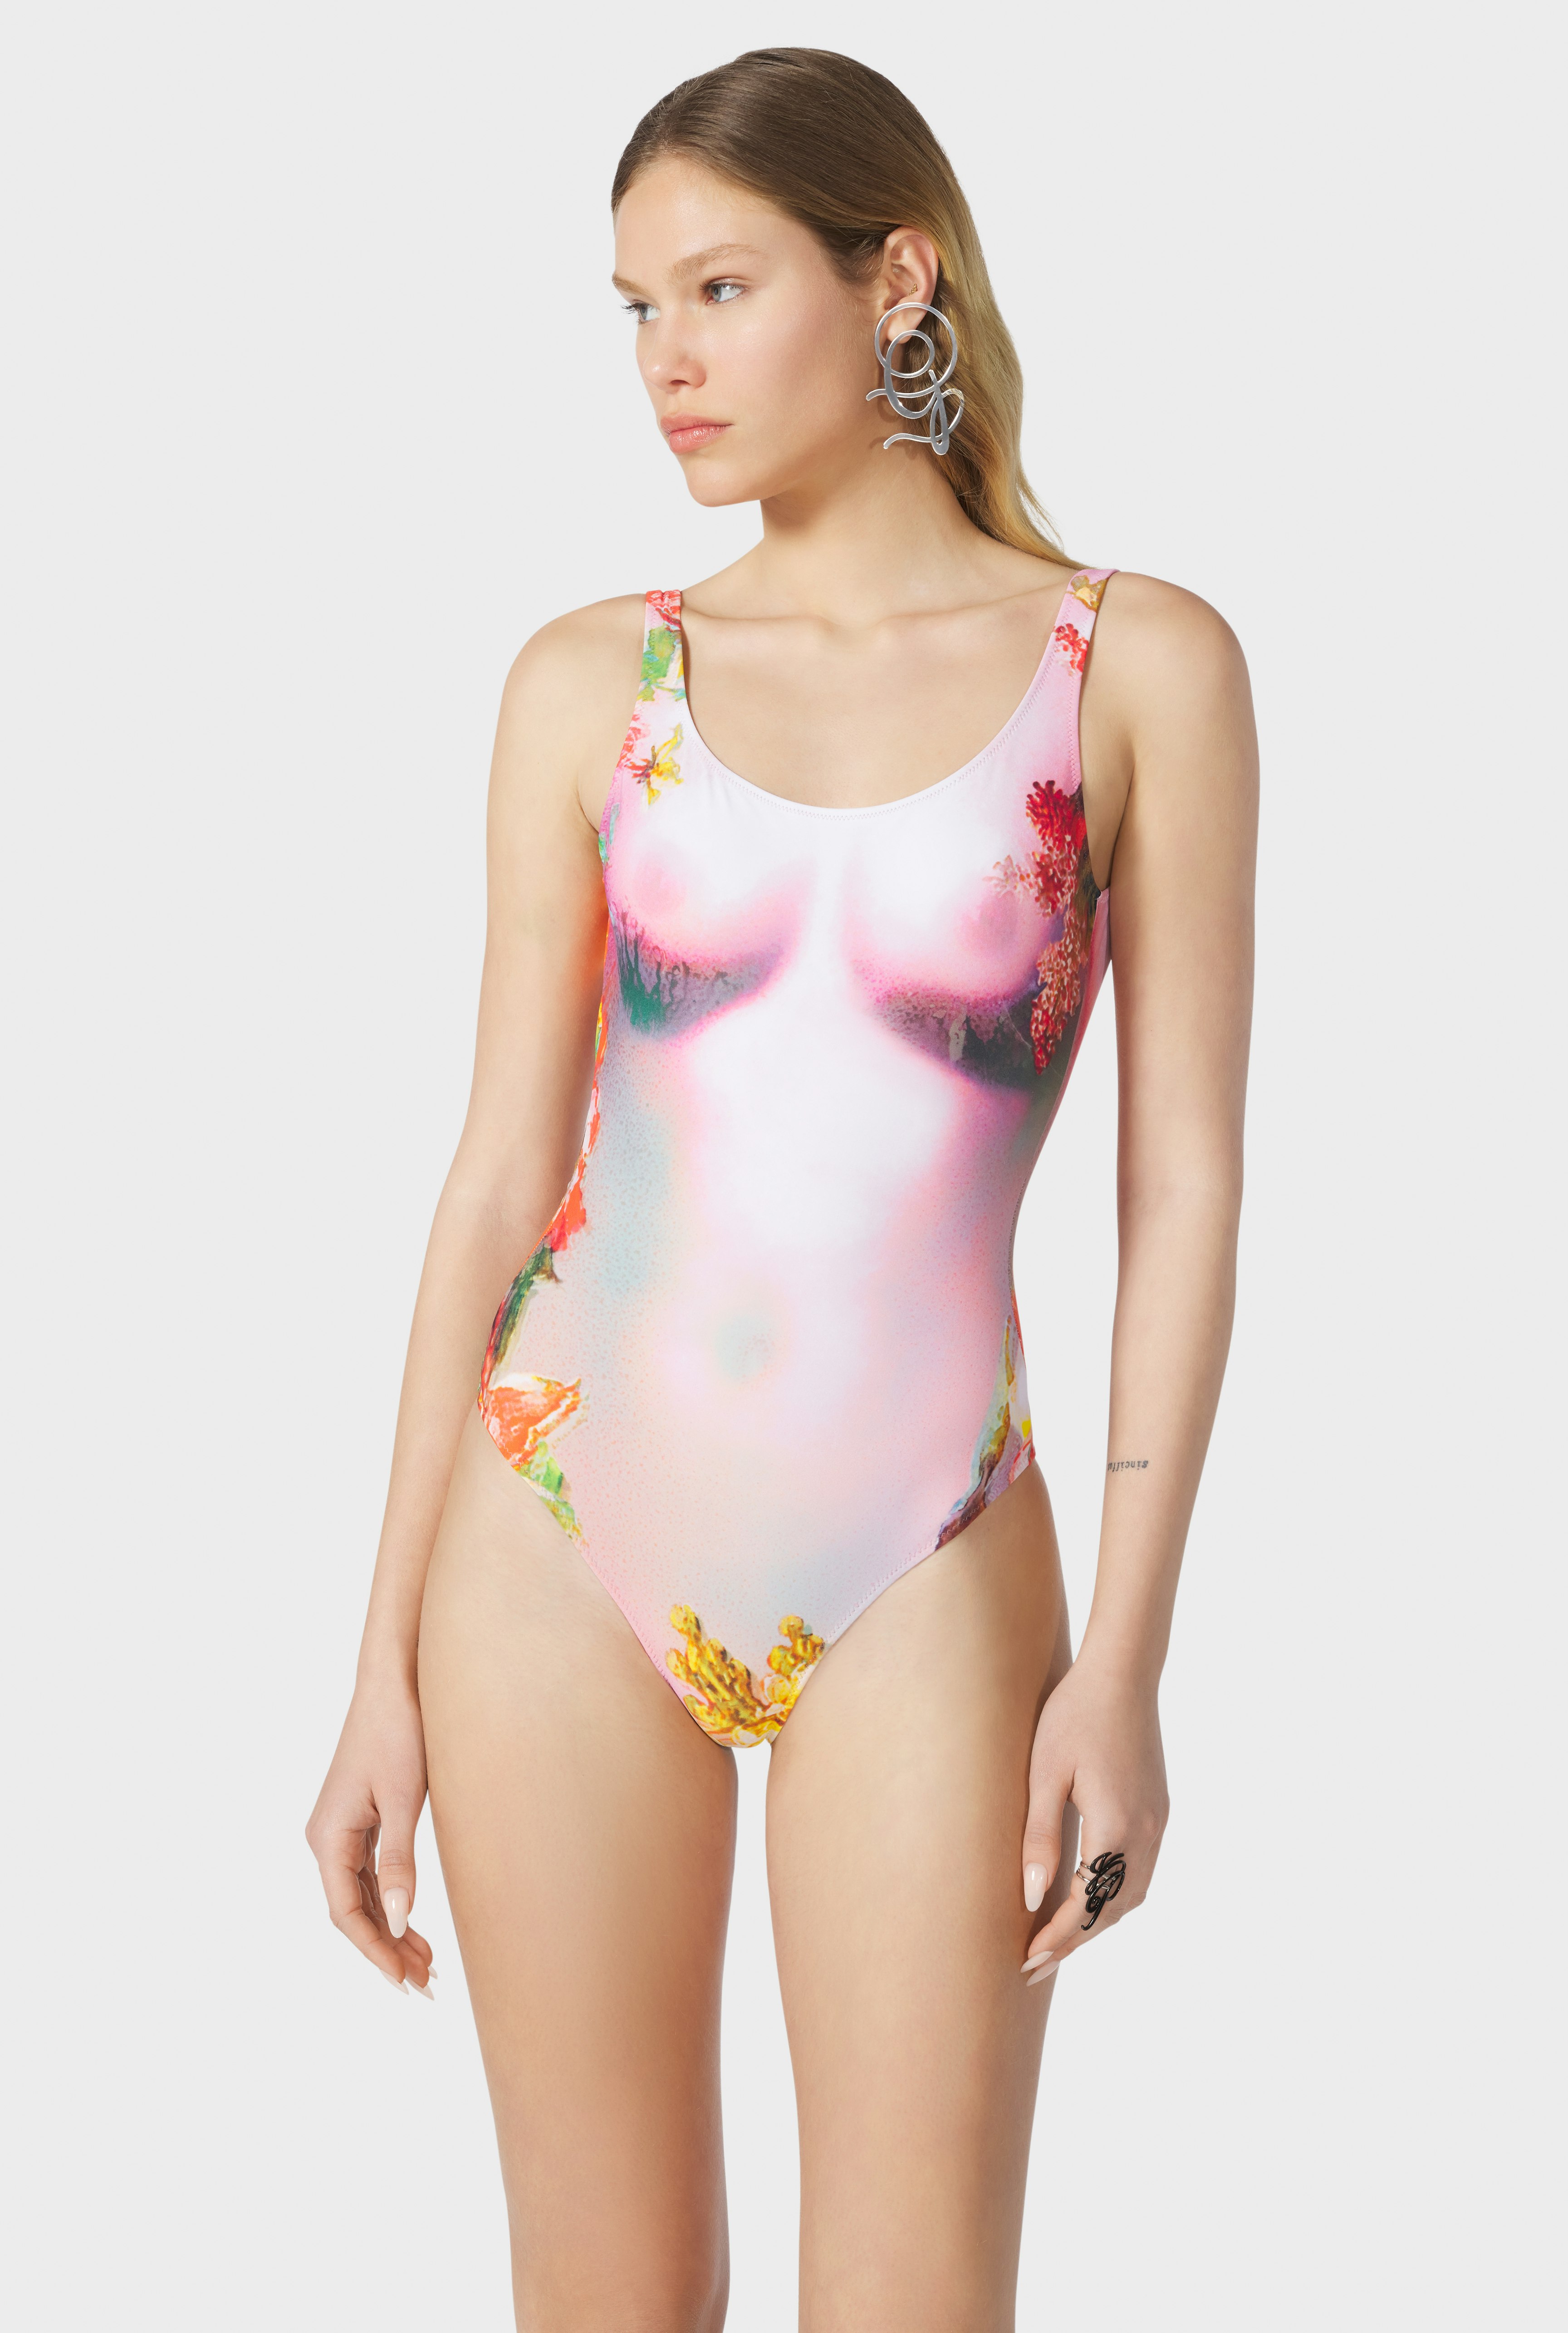 The Pink Body Flower Swimsuit